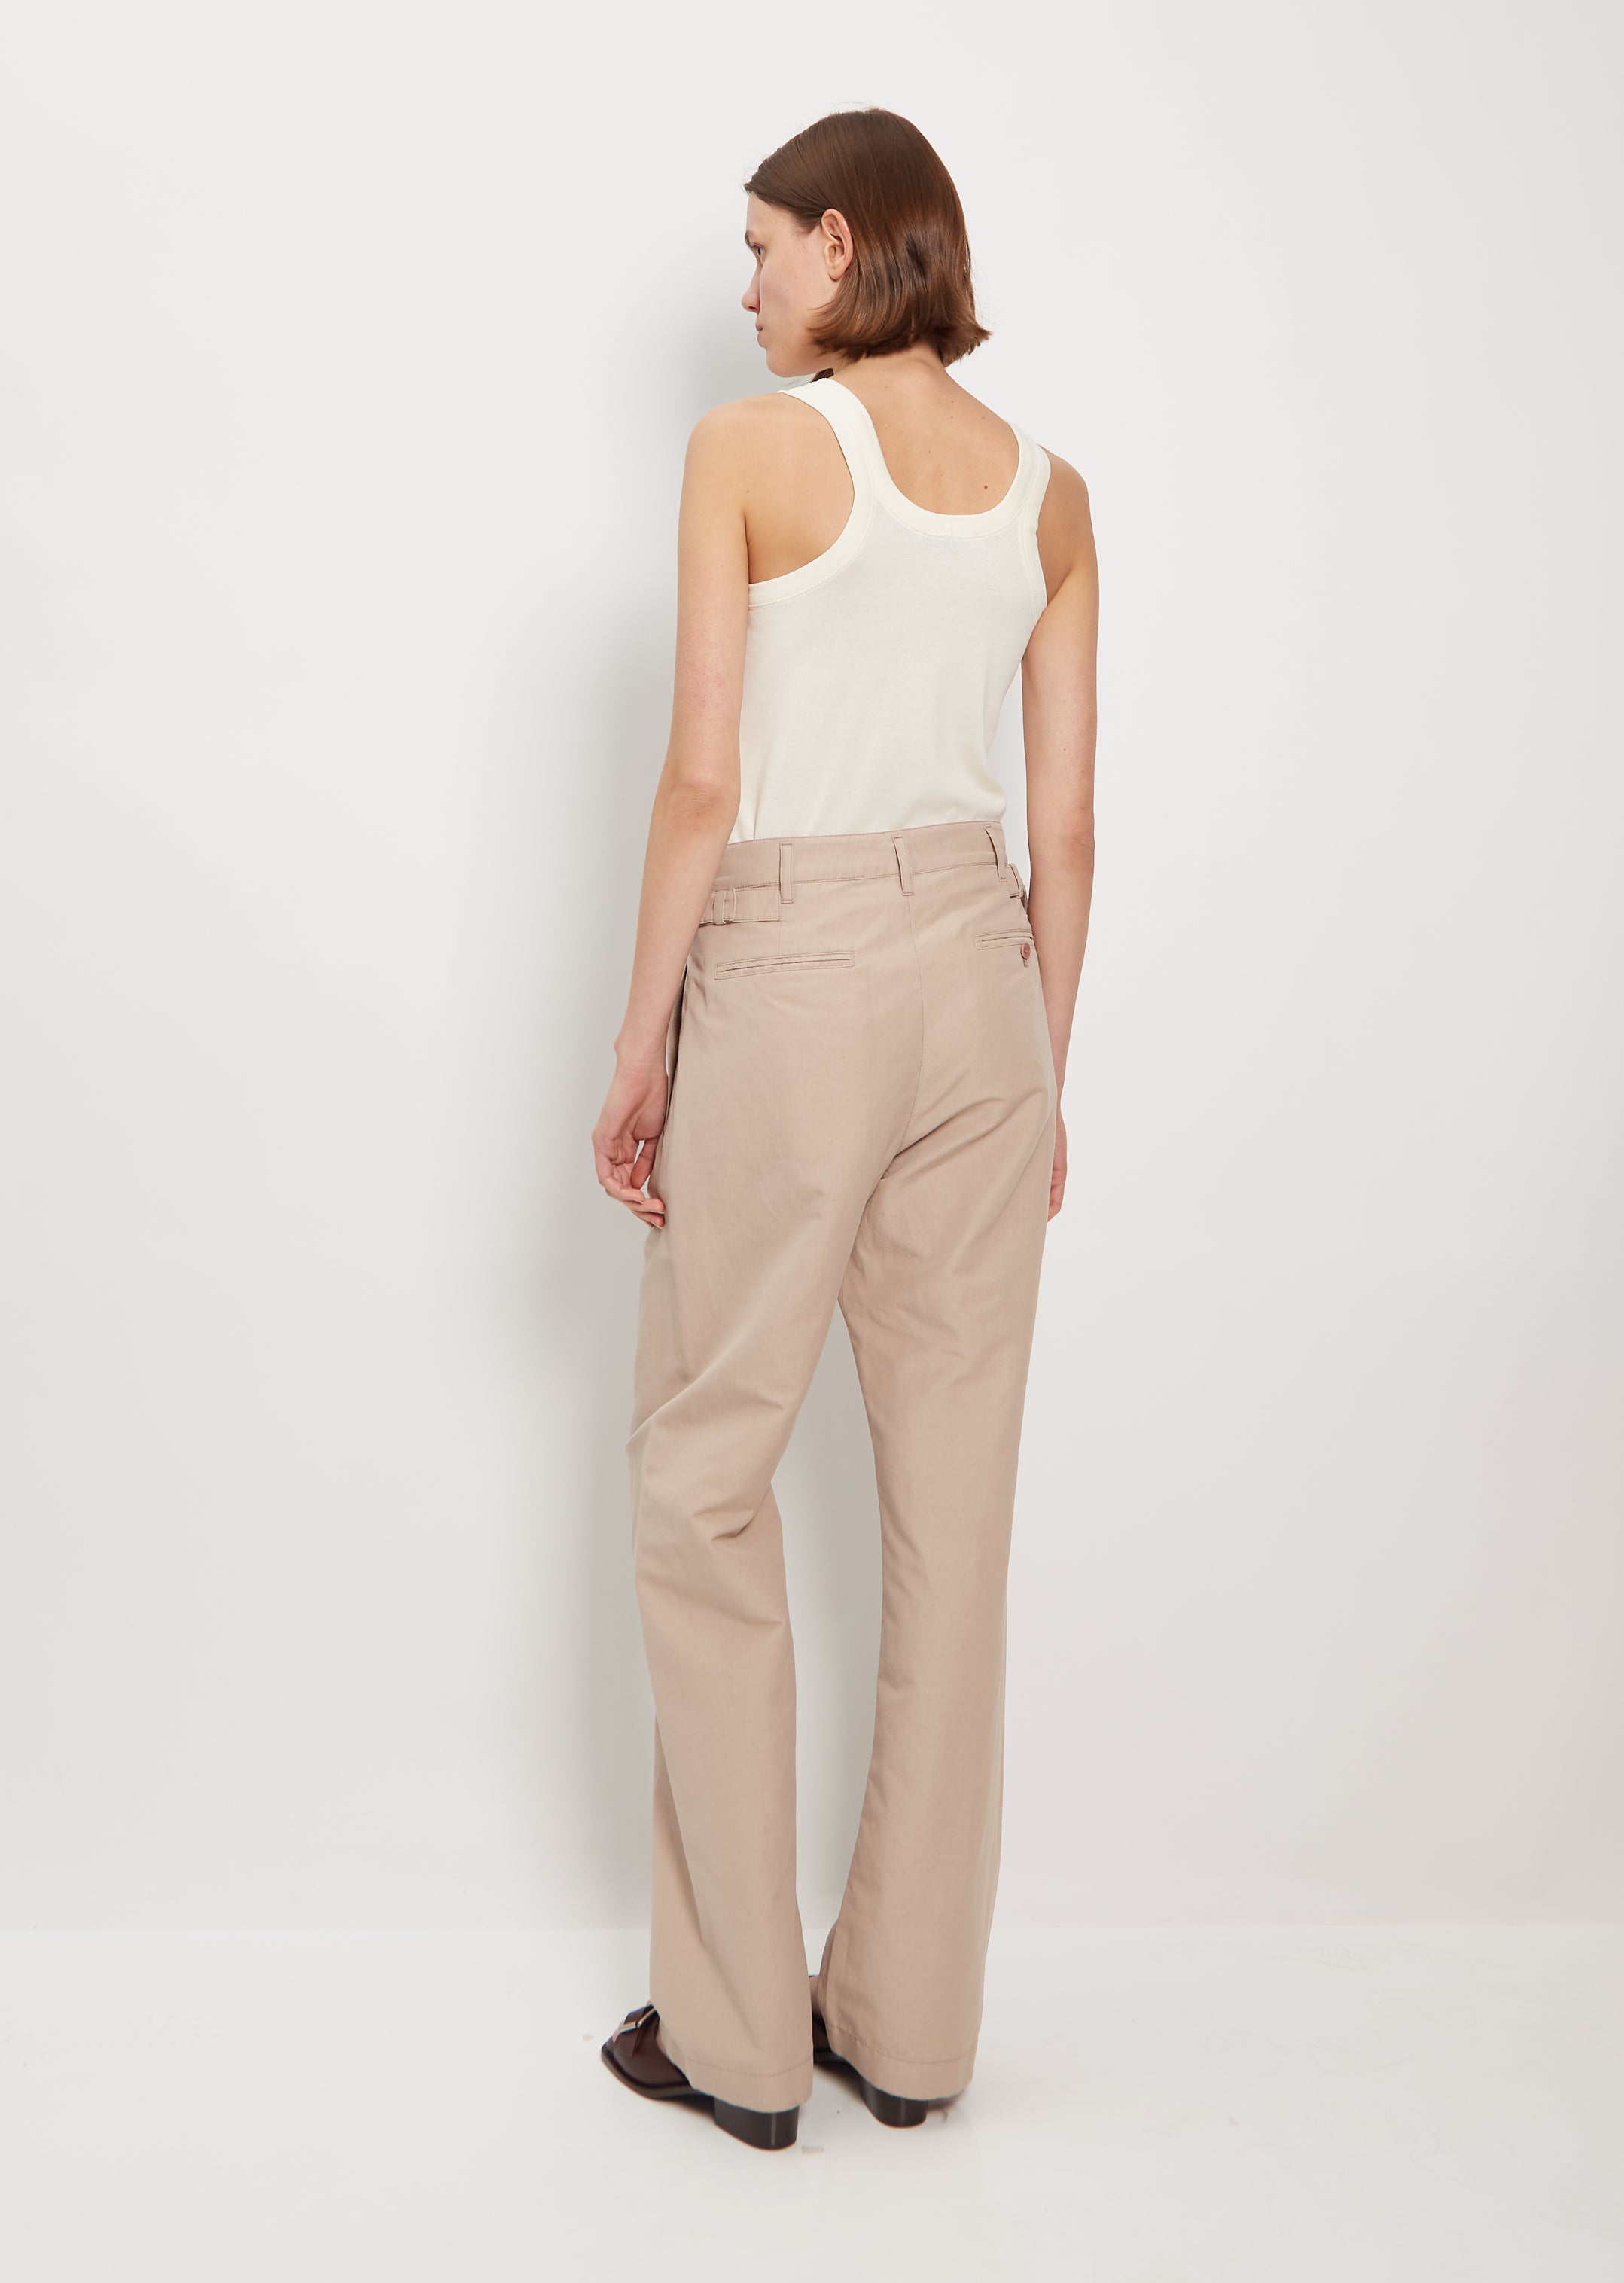 Ring Jacket | Muted Brown Cotton Twill Pleated Trousers – Baltzar